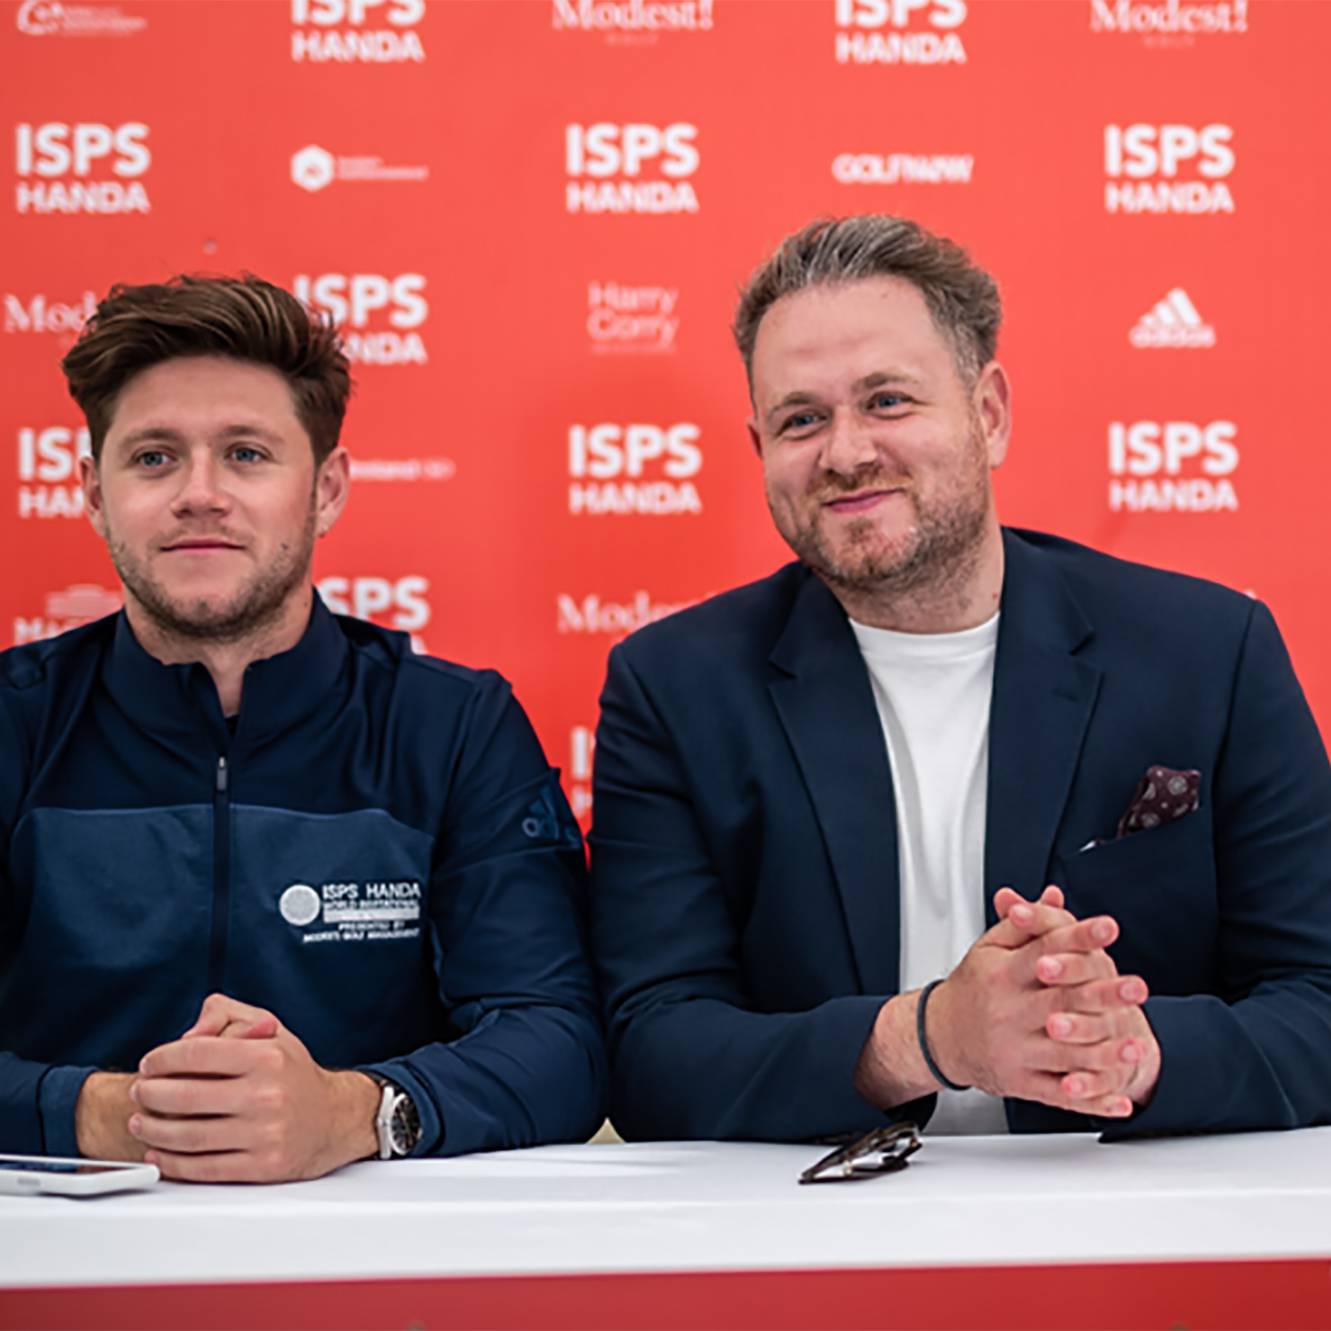 Modest! Golf's Niall Horan and Mark McDonnell